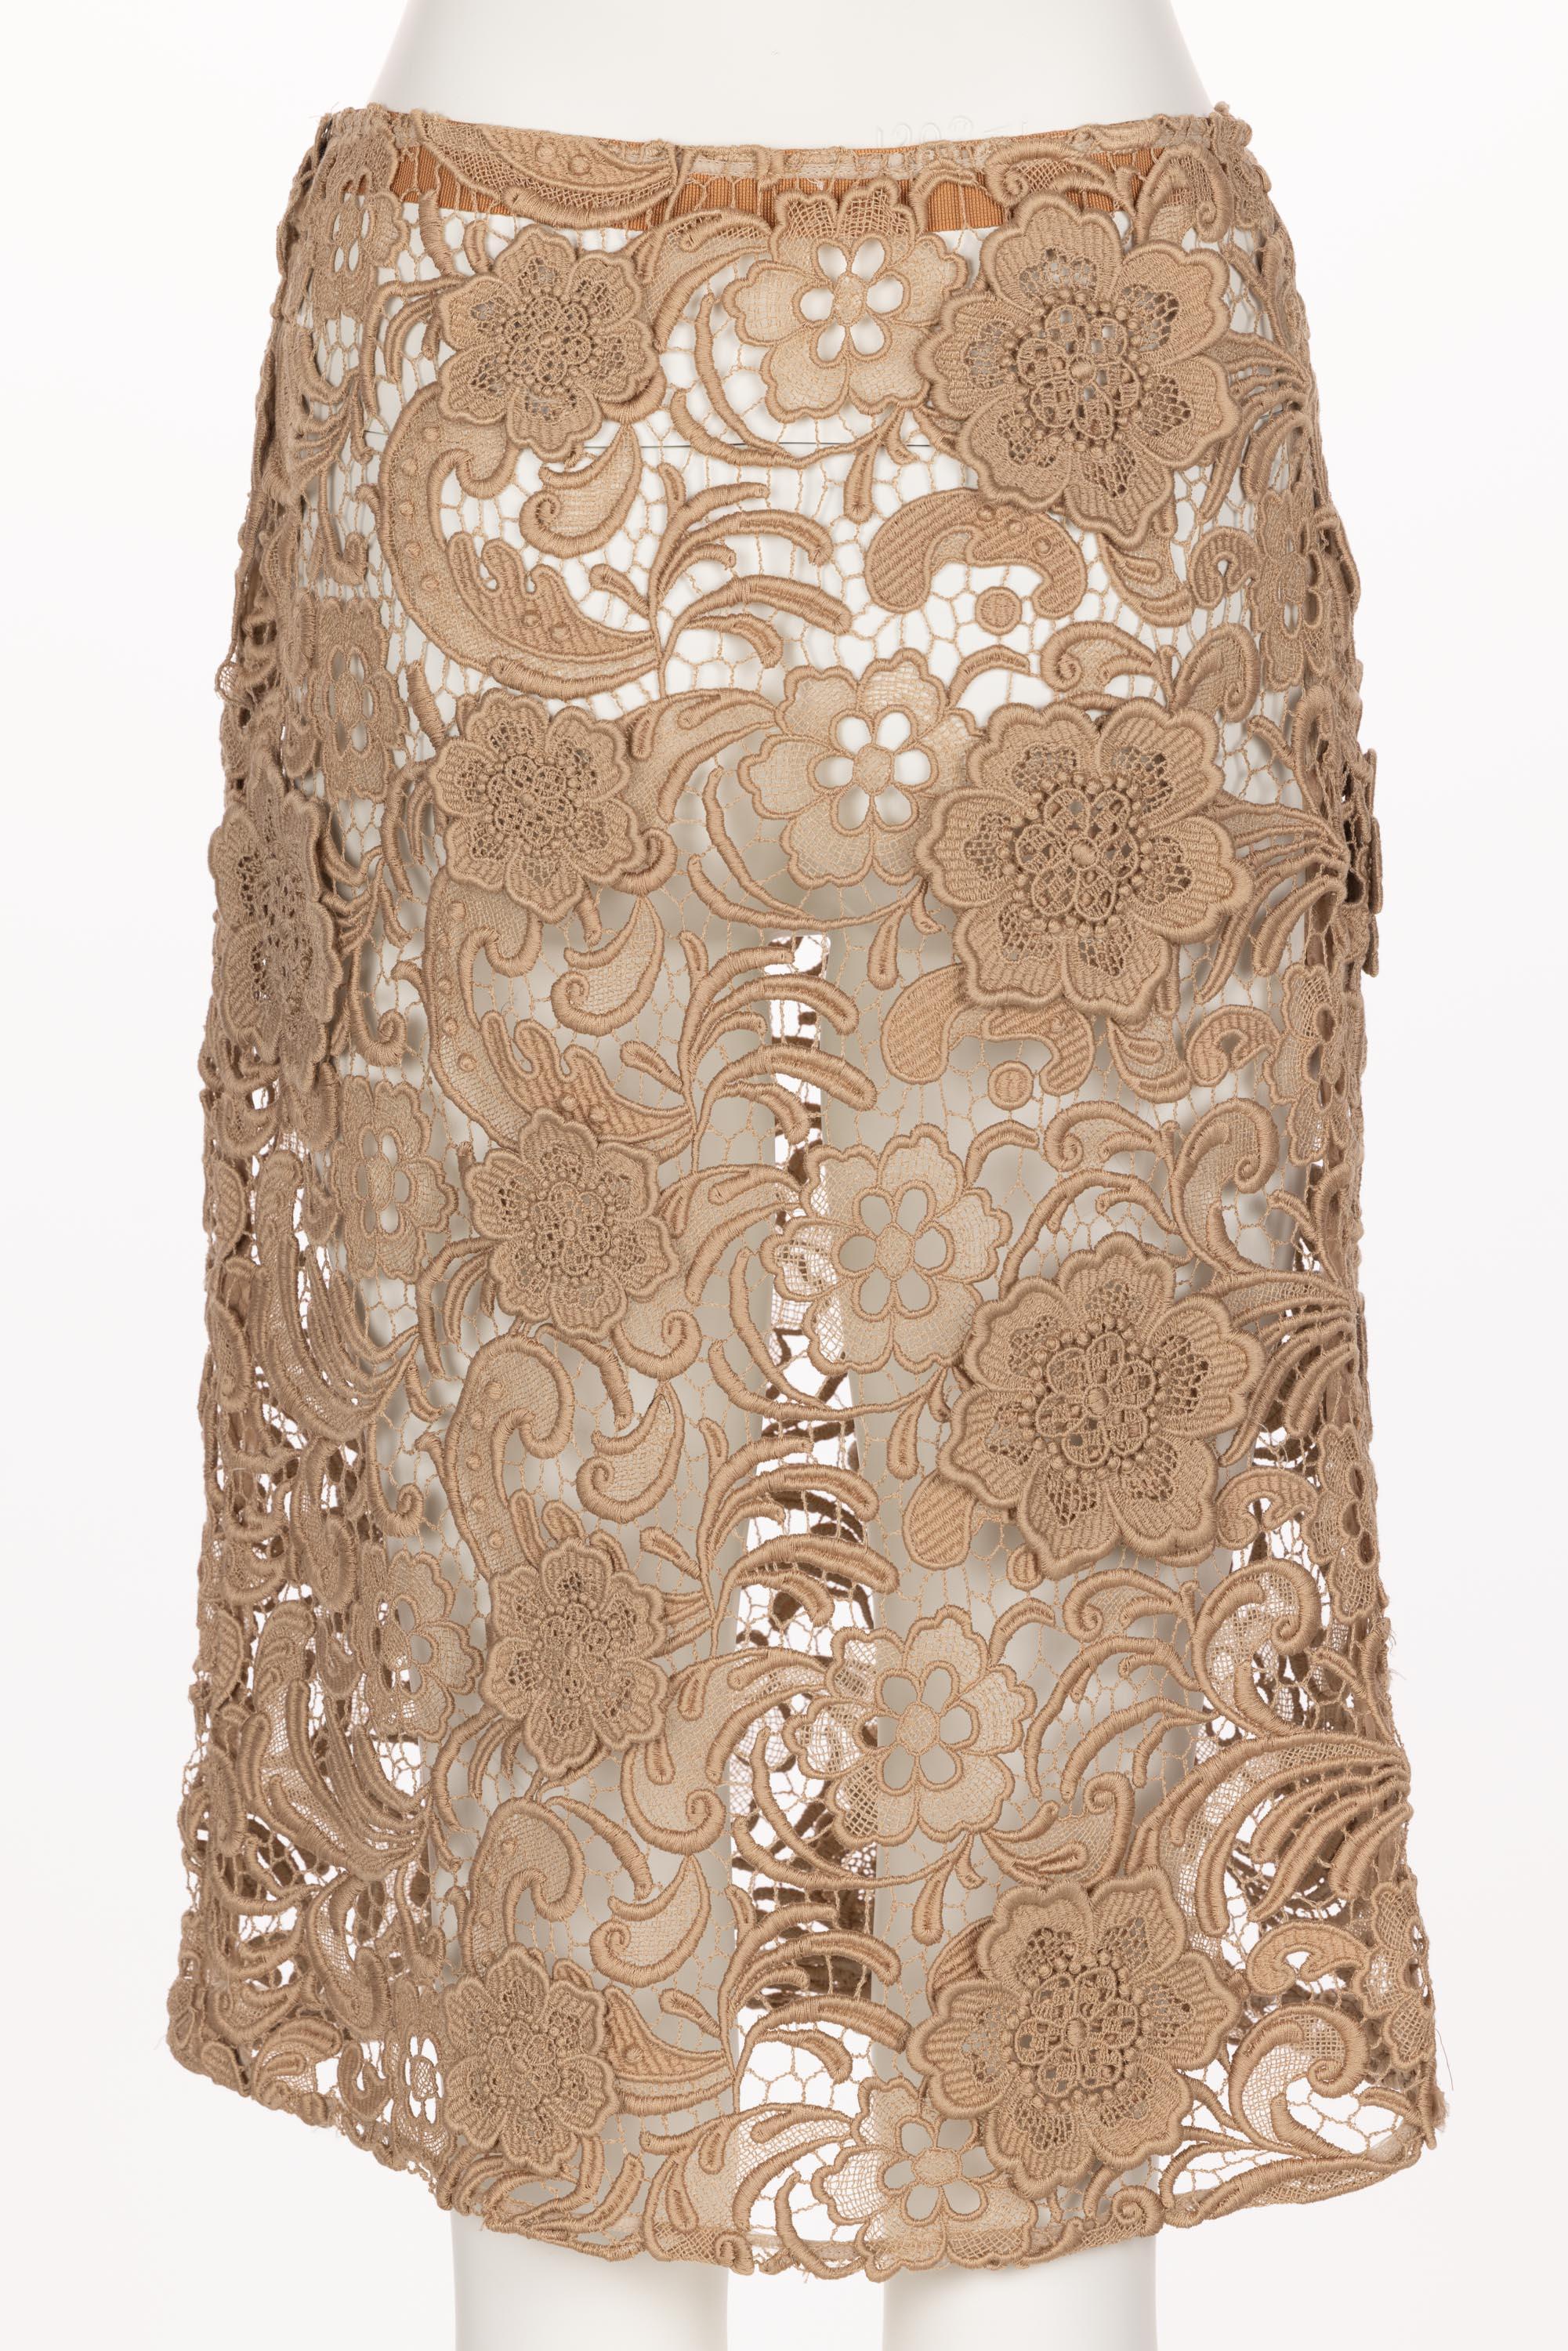 Prada Tan Lace Skirt Fall 2008 Runway  In Excellent Condition For Sale In Boca Raton, FL